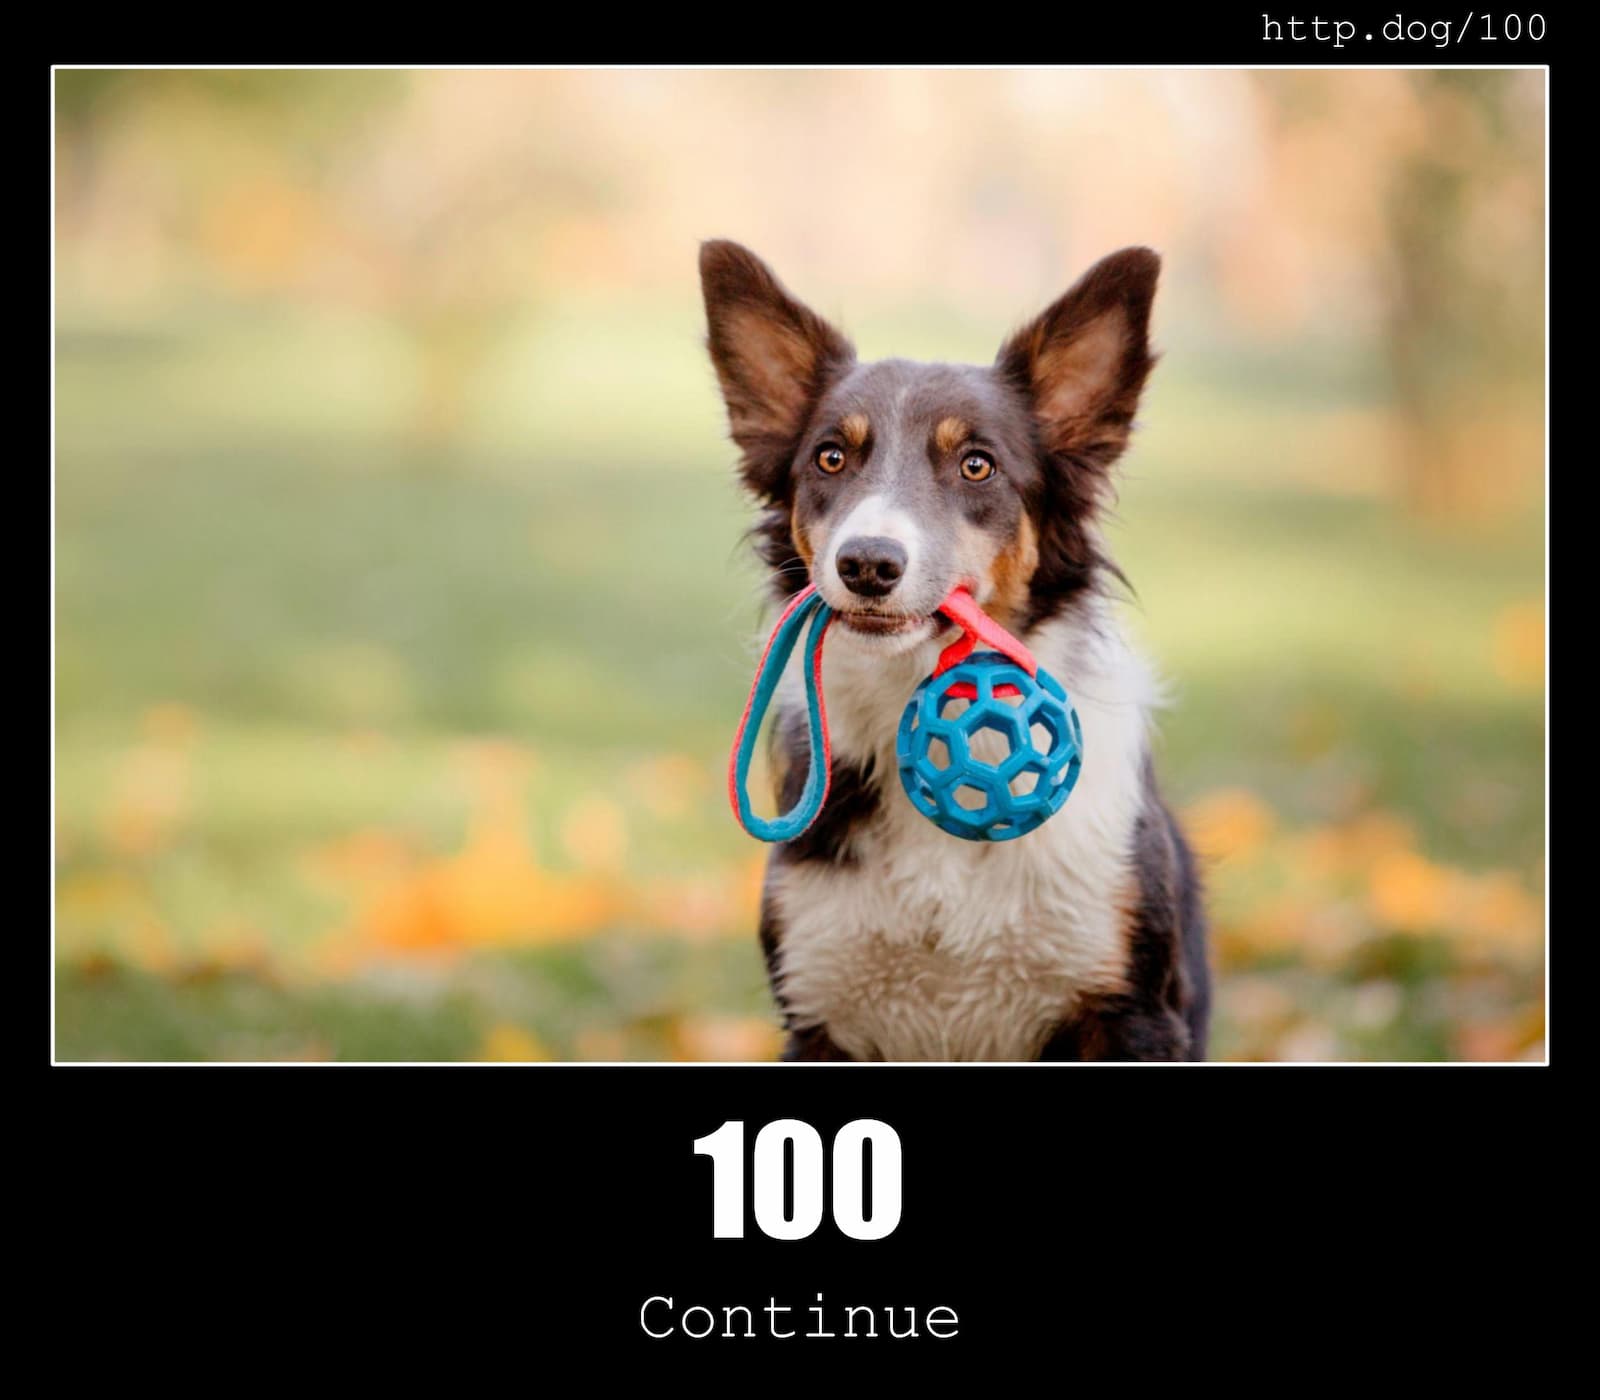 HTTP Status Code 100 Continue & Dogs